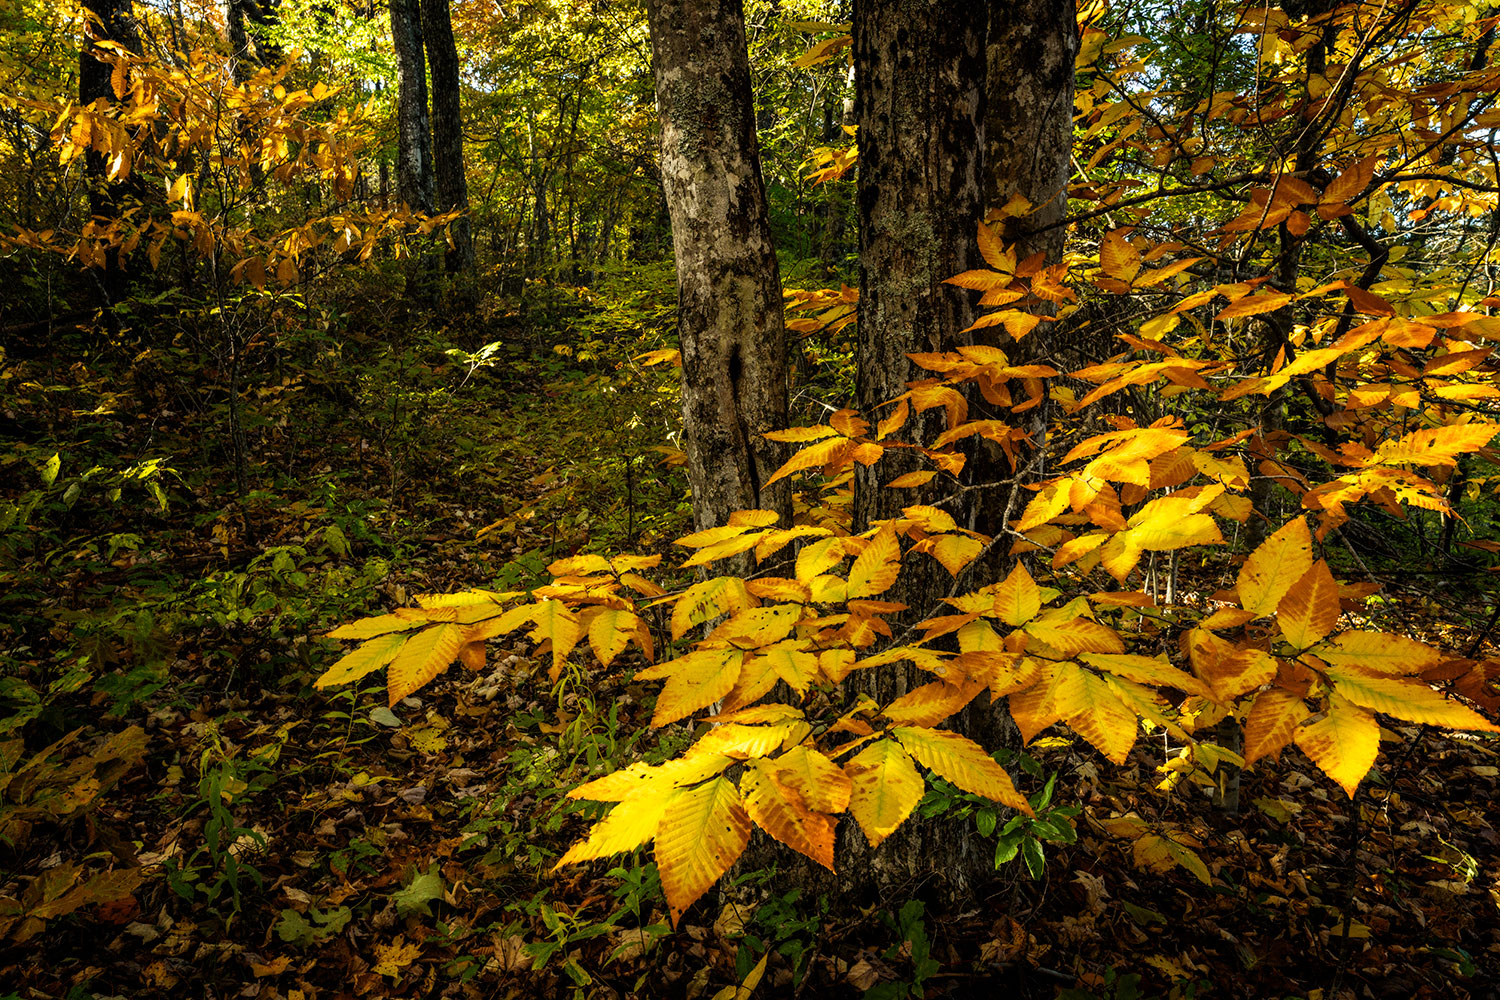 A flash of low yellow leaves splays out int he foreground, with a young forest in autum in the background.